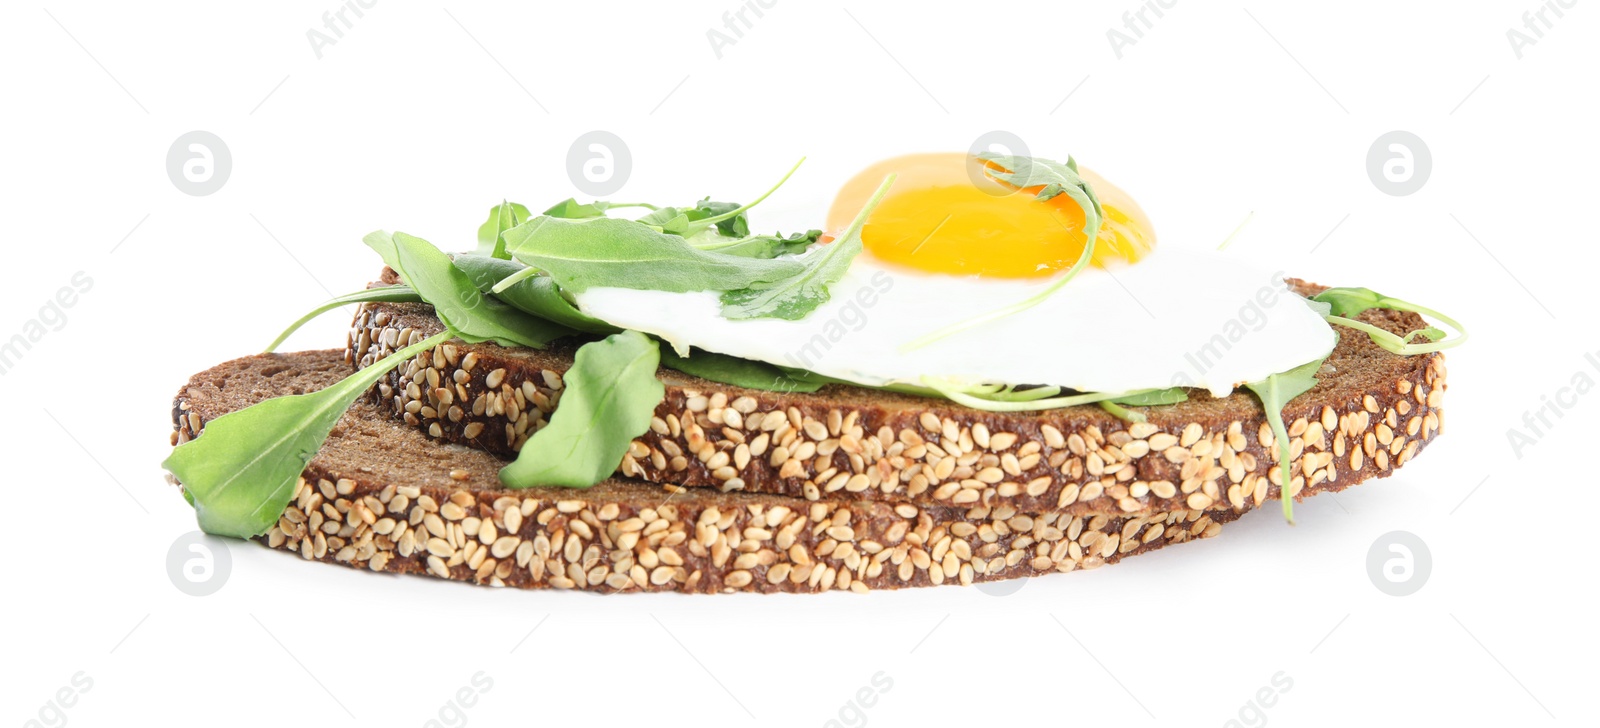 Photo of Delicious sandwich with arugula and fried egg isolated on white